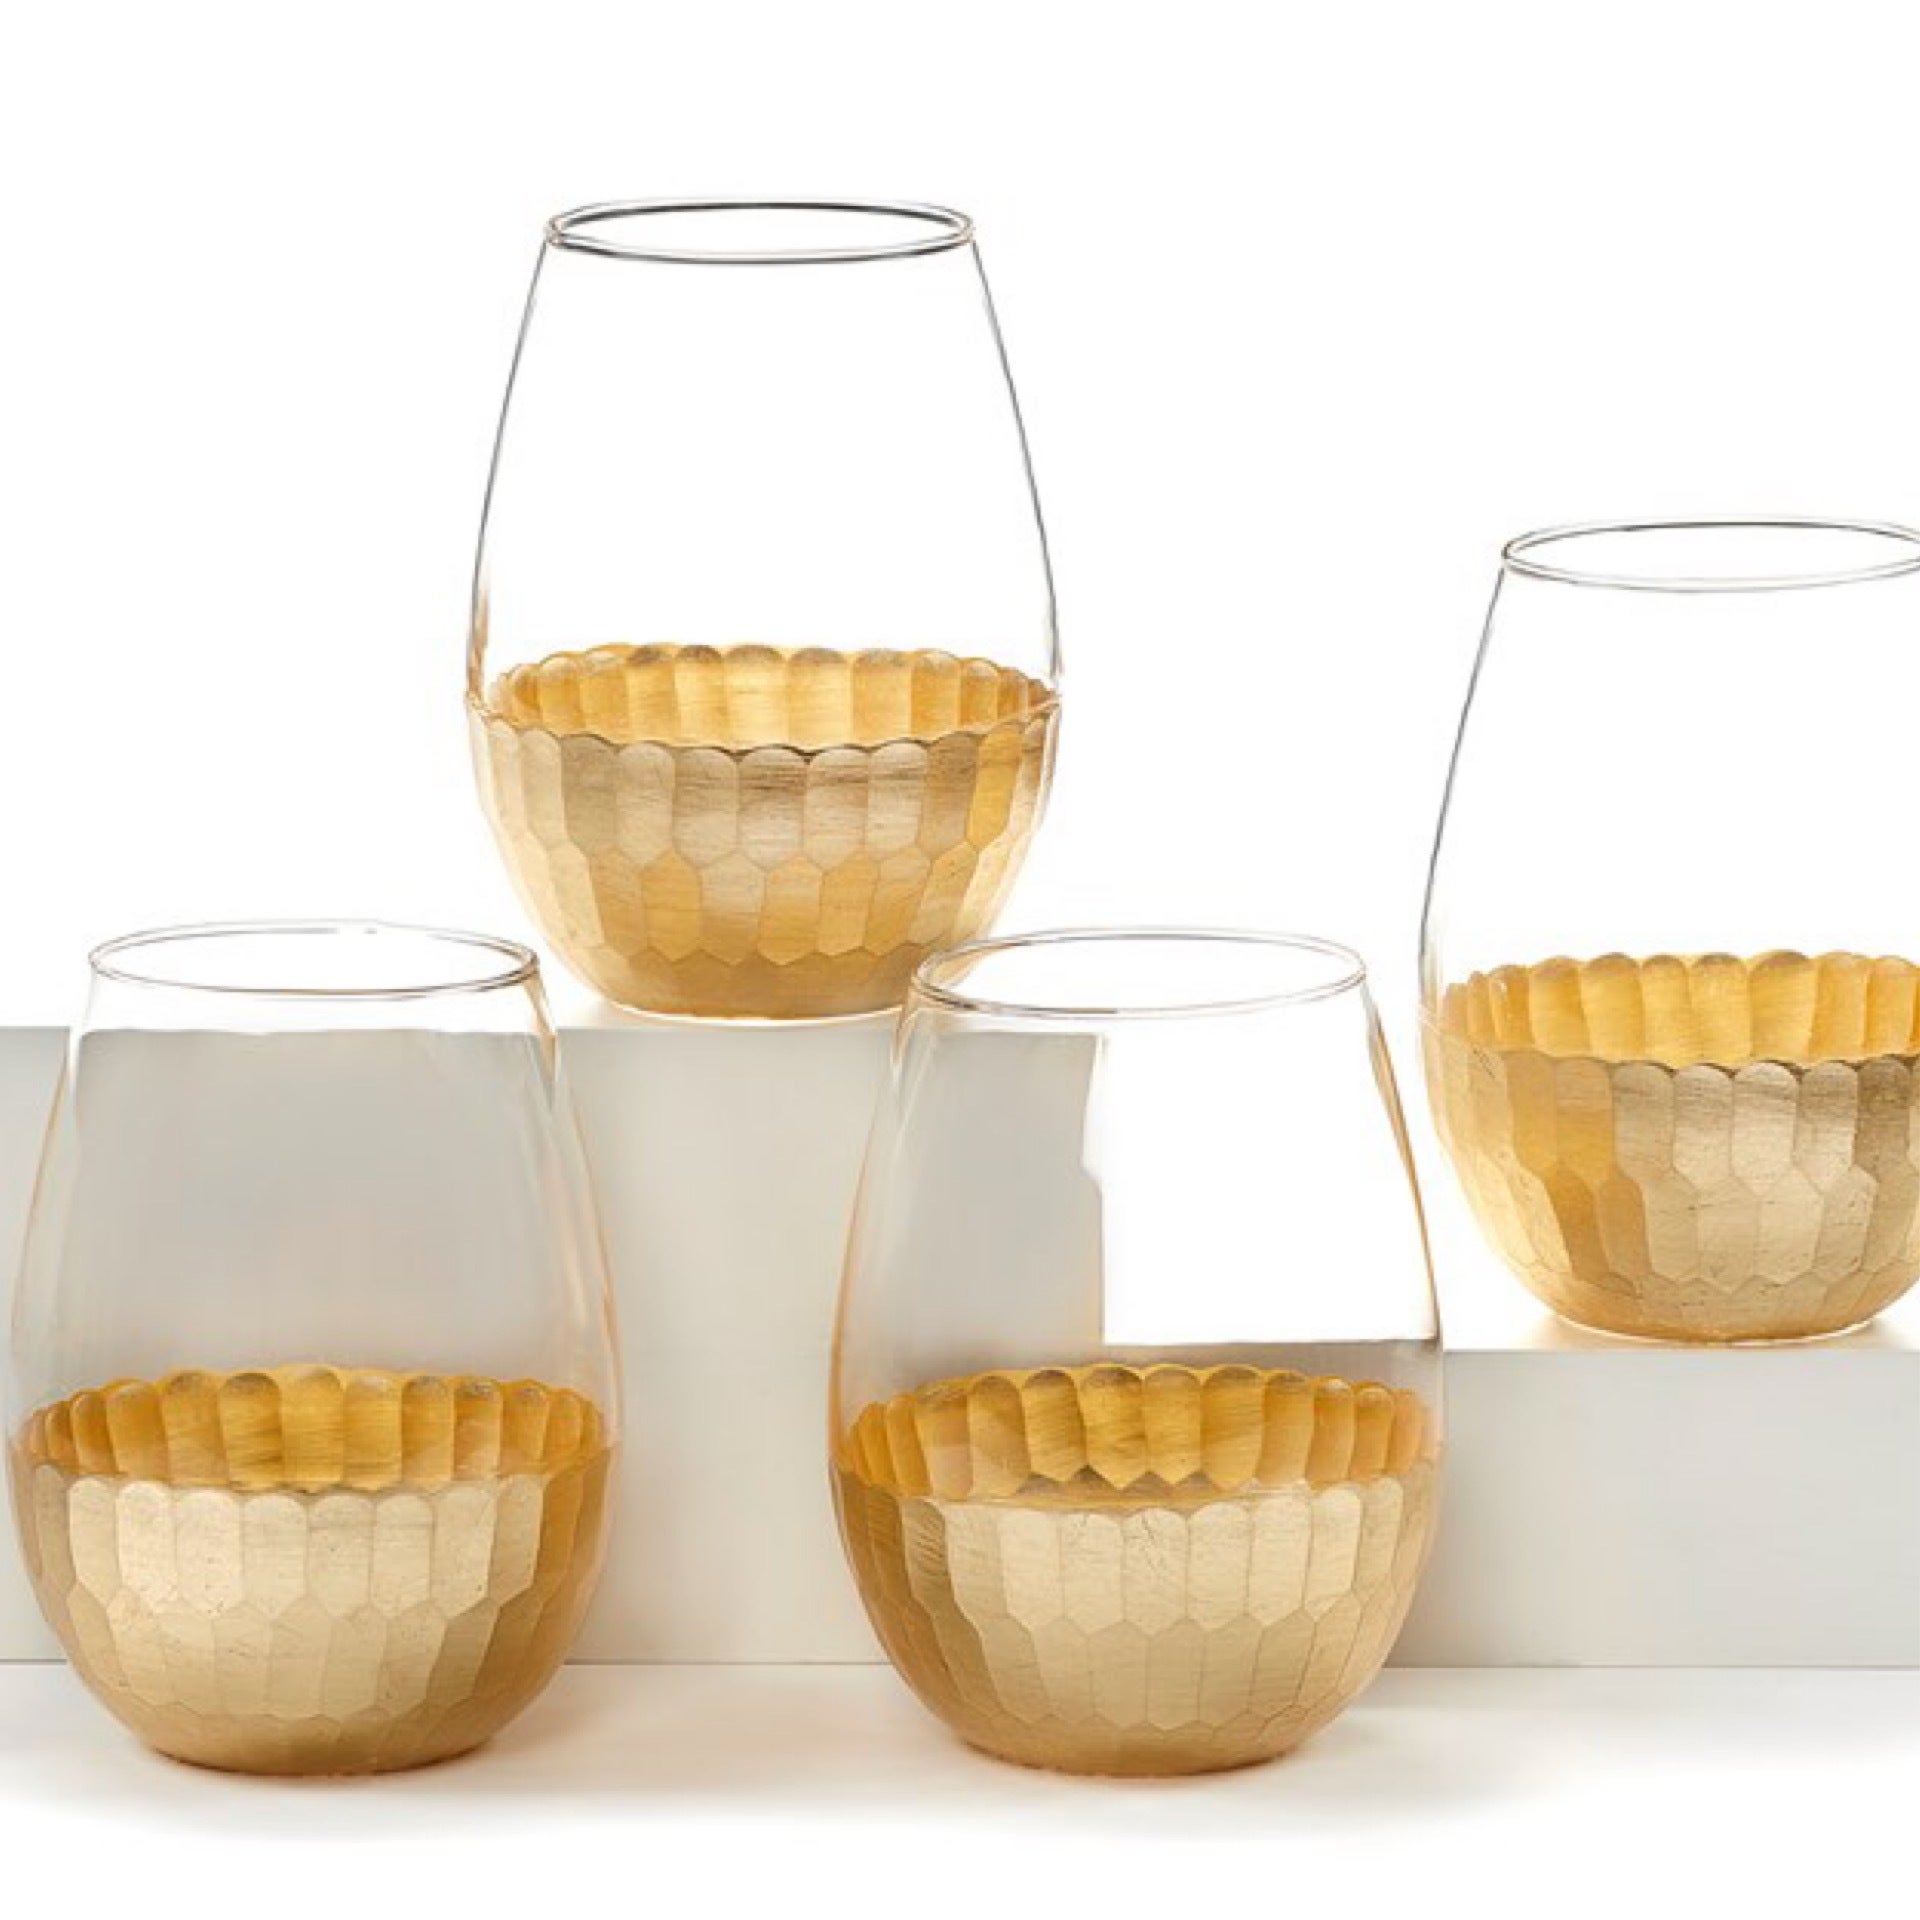 Monogrammed L Gold Foil 16 ounce Glass Stemless Wine Glass Set of 2